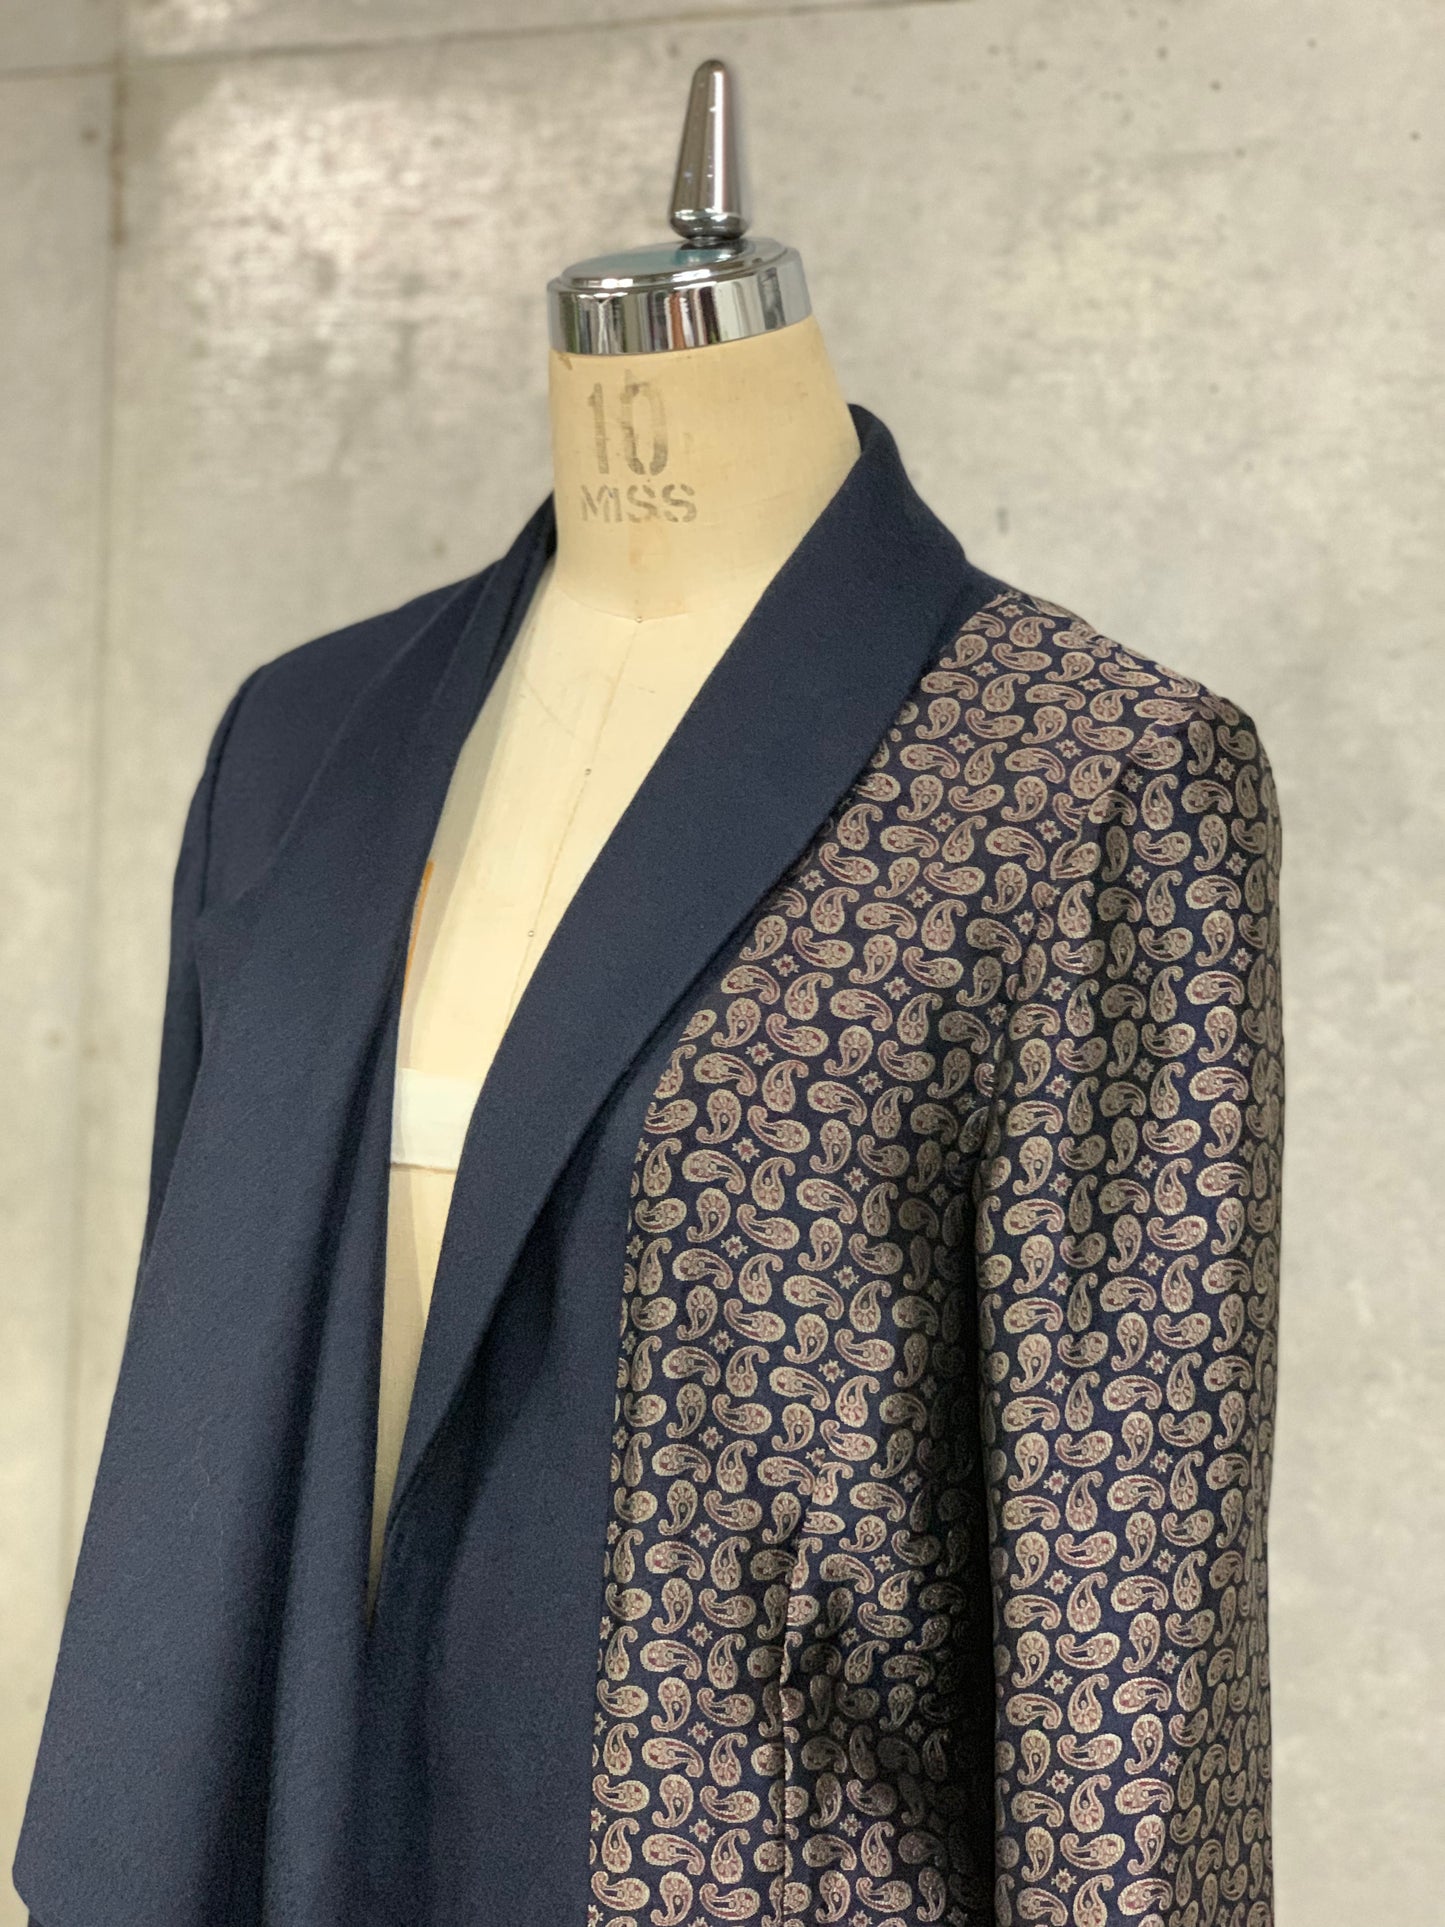 Drape-Front Jacket in Navy and Brass Paisley